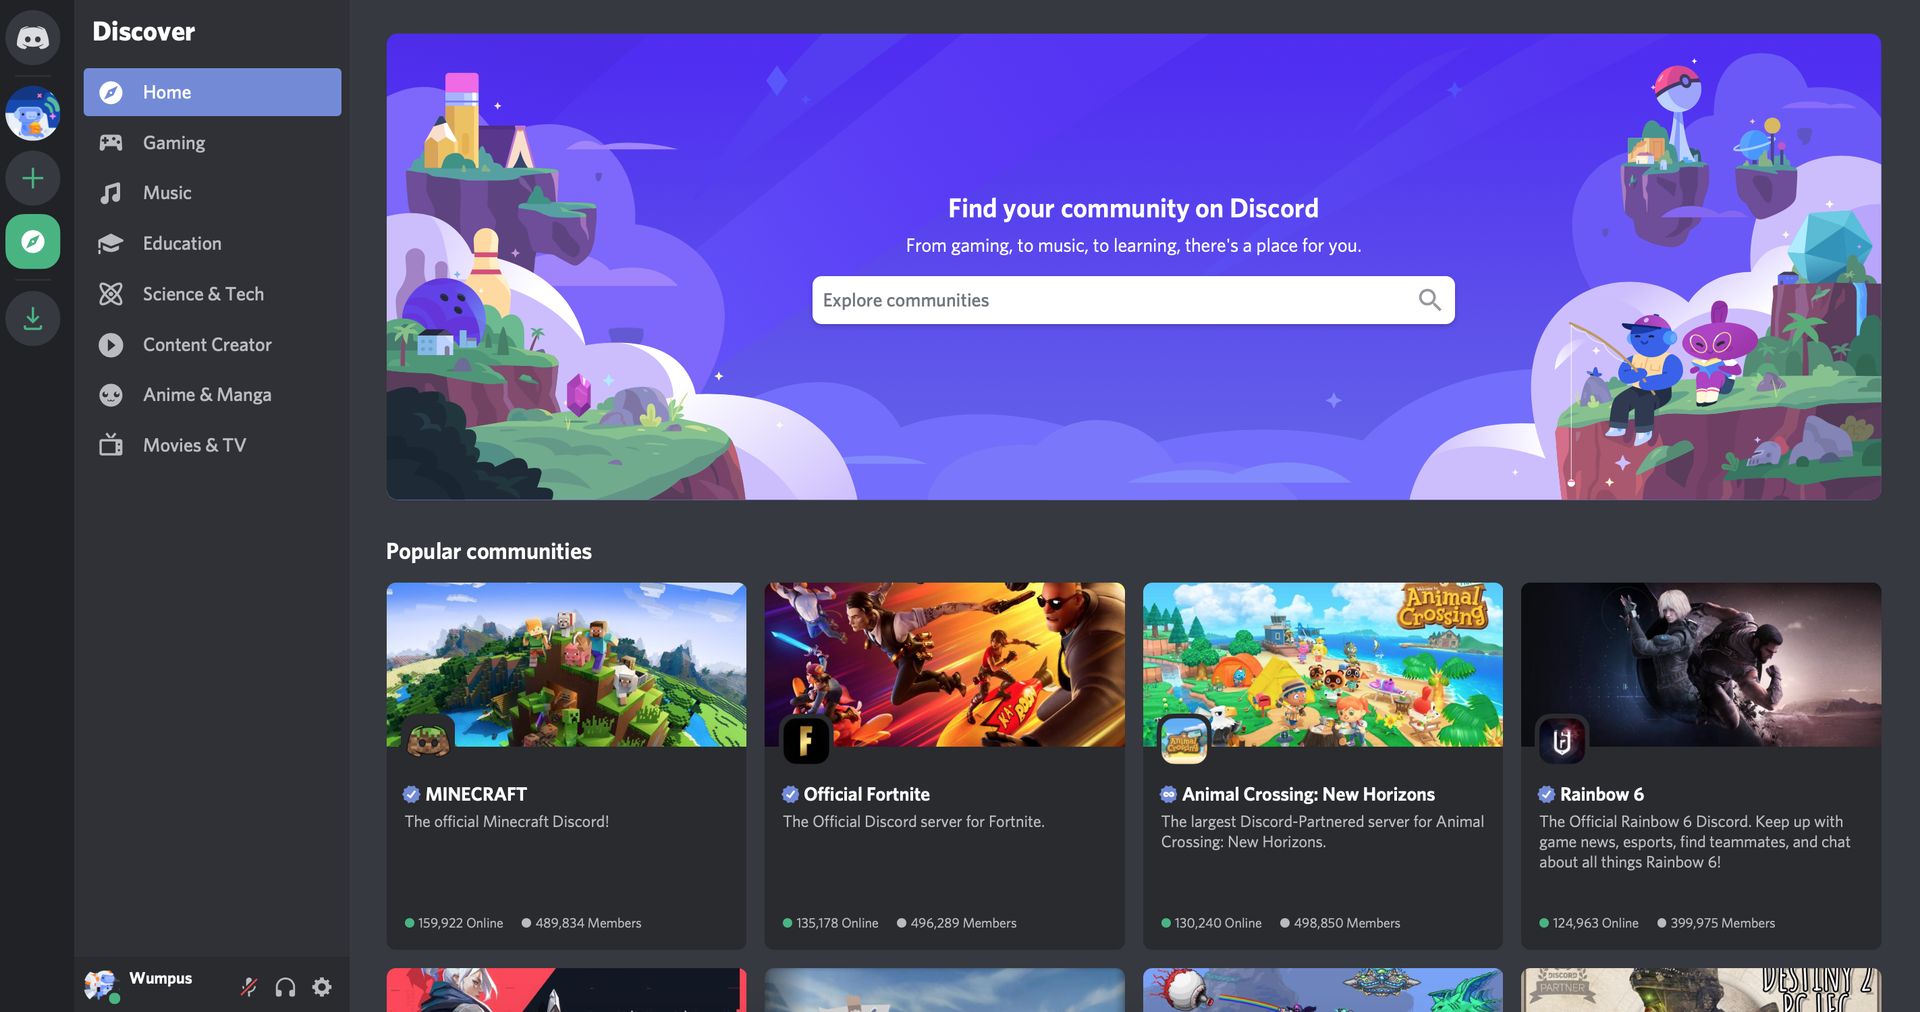 In this article, we are going to go over how to clear Discord cache on PC, Mac, iOS, and Android, so you can use Discord without it slowing down.